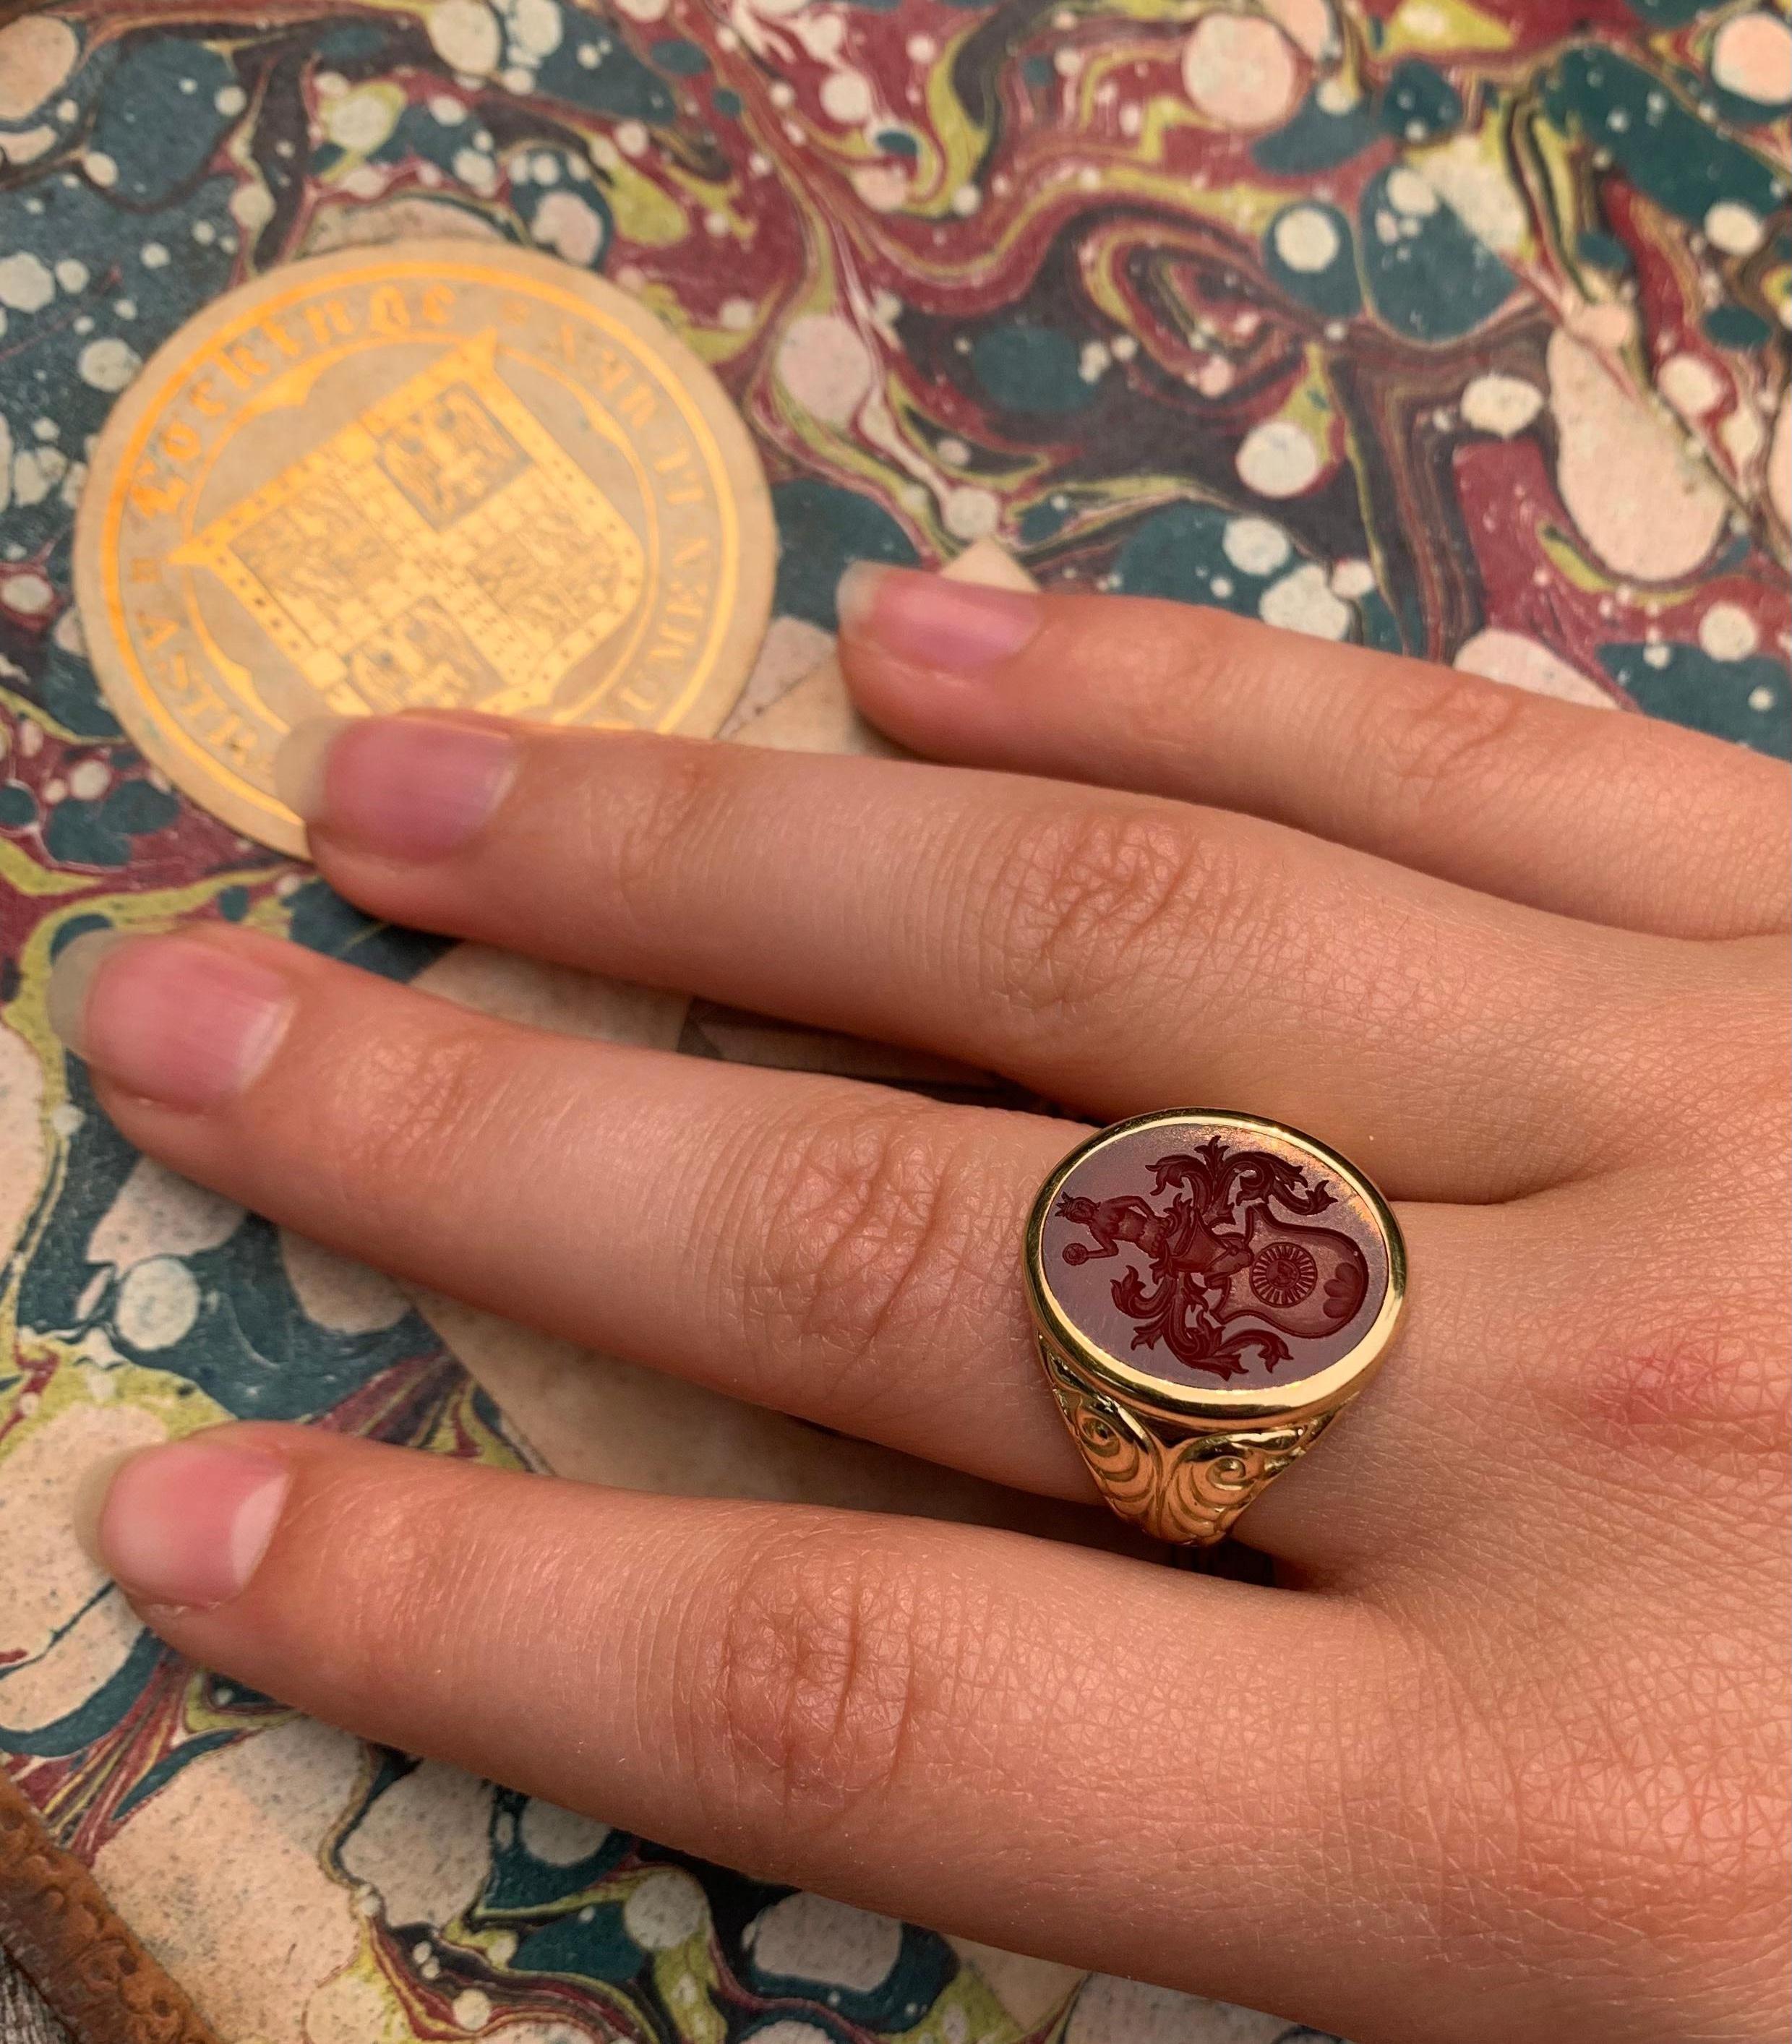 Fine large antique 14K yellow gold and carnelian Sun in Splendour intaglio Georgian signet ring 
Early 19th Century
Superbly carved oval carnelian intaglio of an ornate heraldic crest with a central shield shaped coat of arms depicting a human face